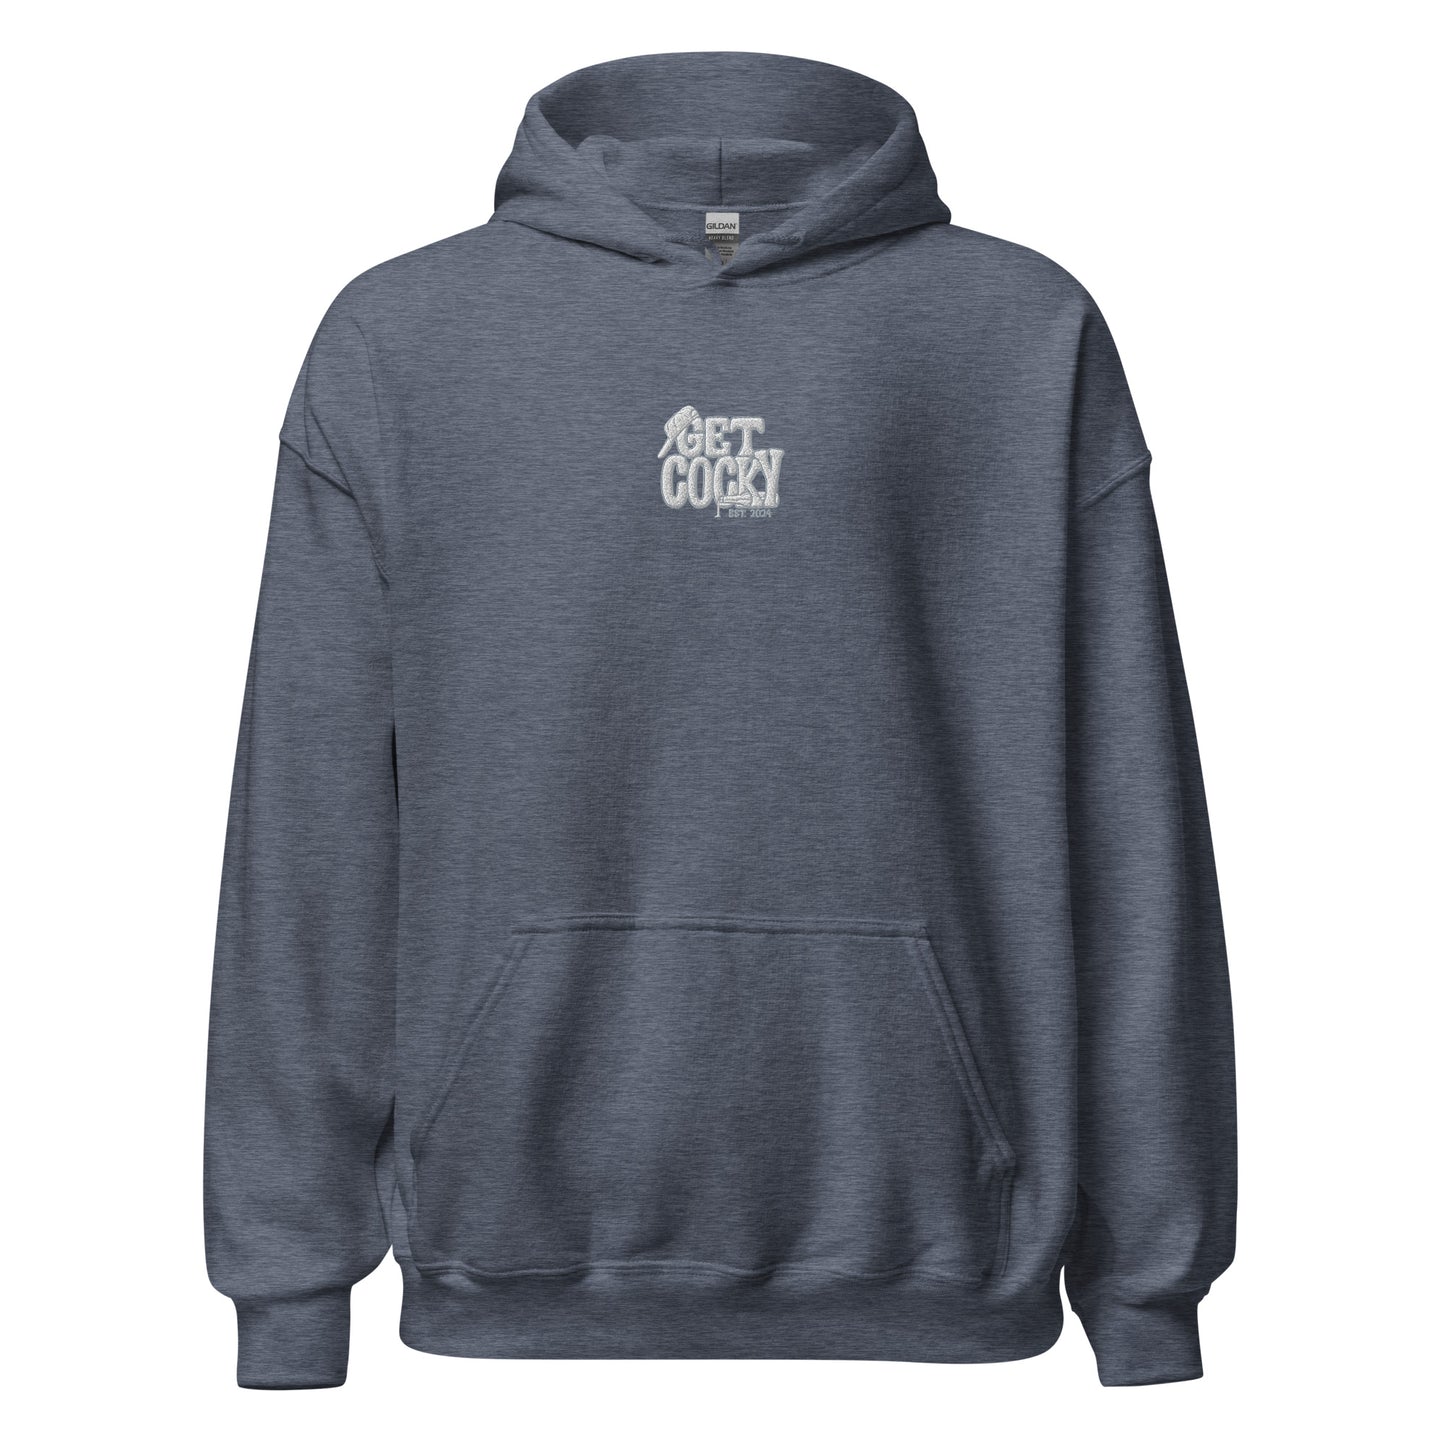 Get Cocky Whiteout Hoodie